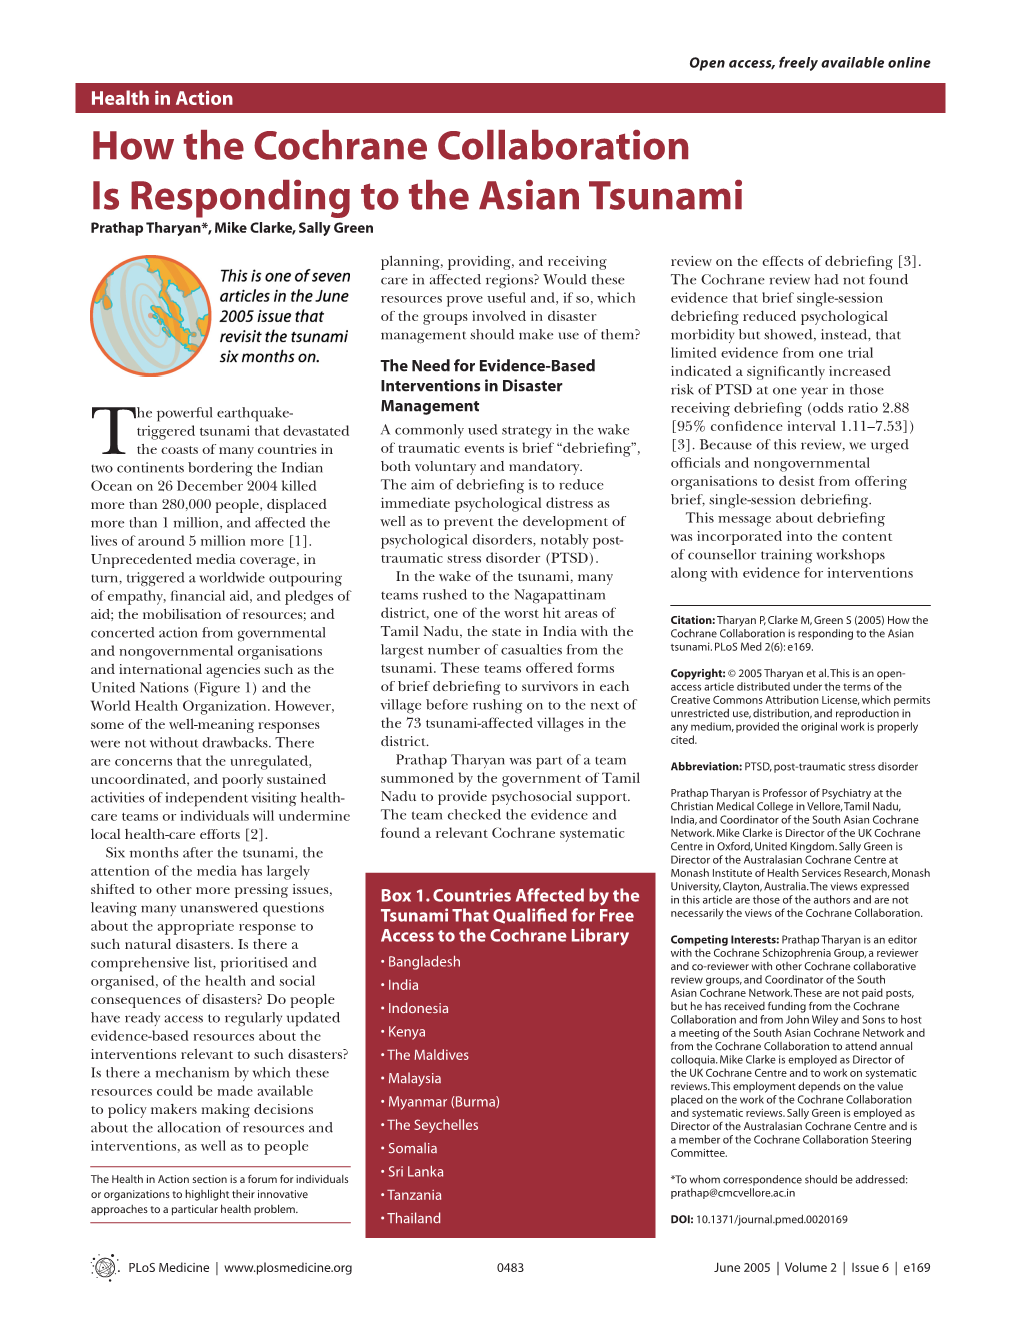 How the Cochrane Collaboration Is Responding to the Asian Tsunami Prathap Tharyan*, Mike Clarke, Sally Green